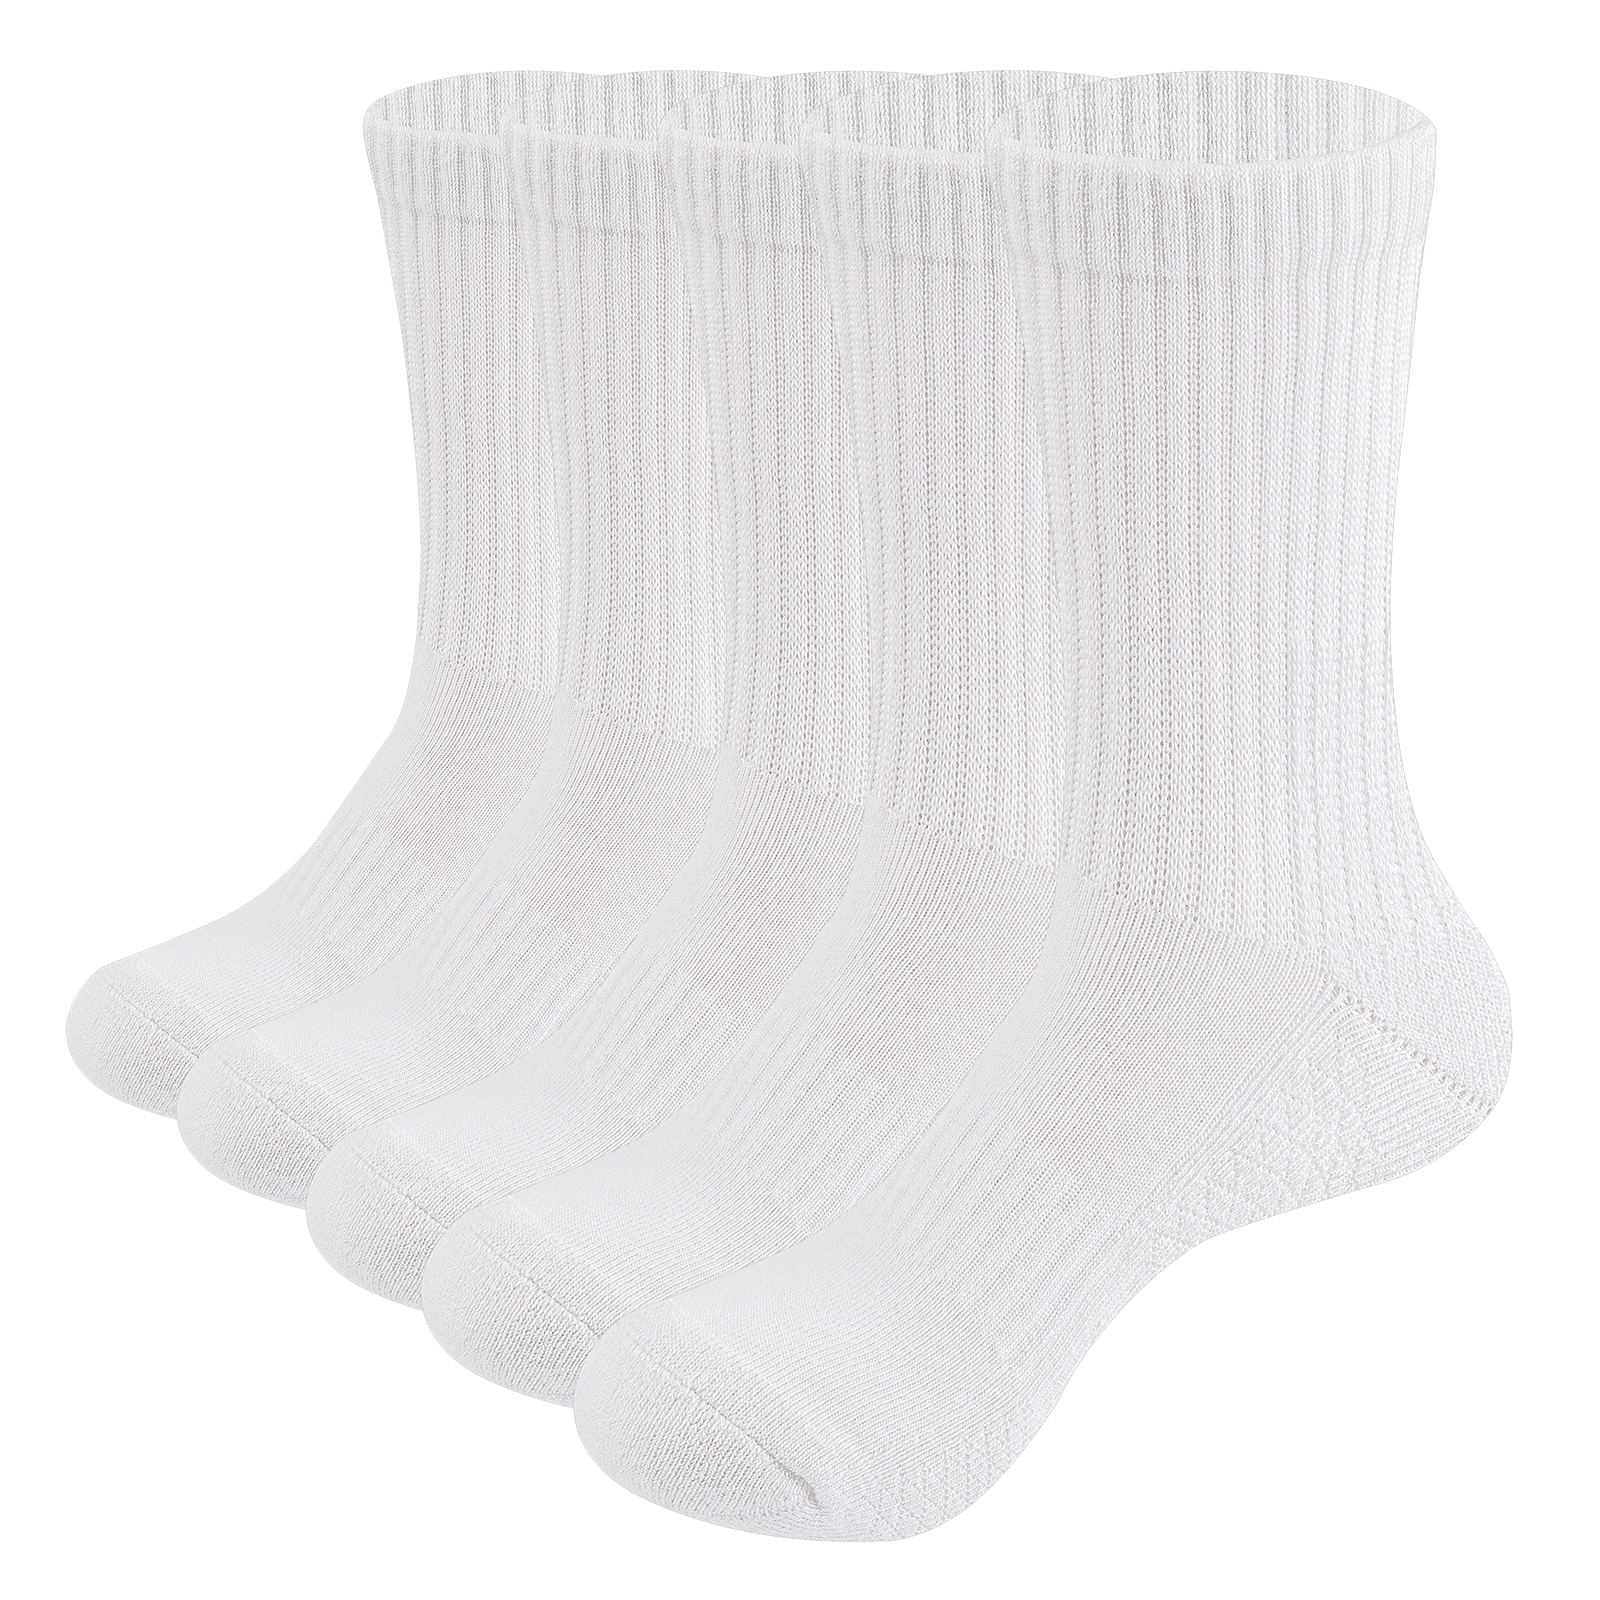 5PW2005 Women Athletic Socks Combed Cotton Terry Cushioned Casual Crew Socks For Ladies